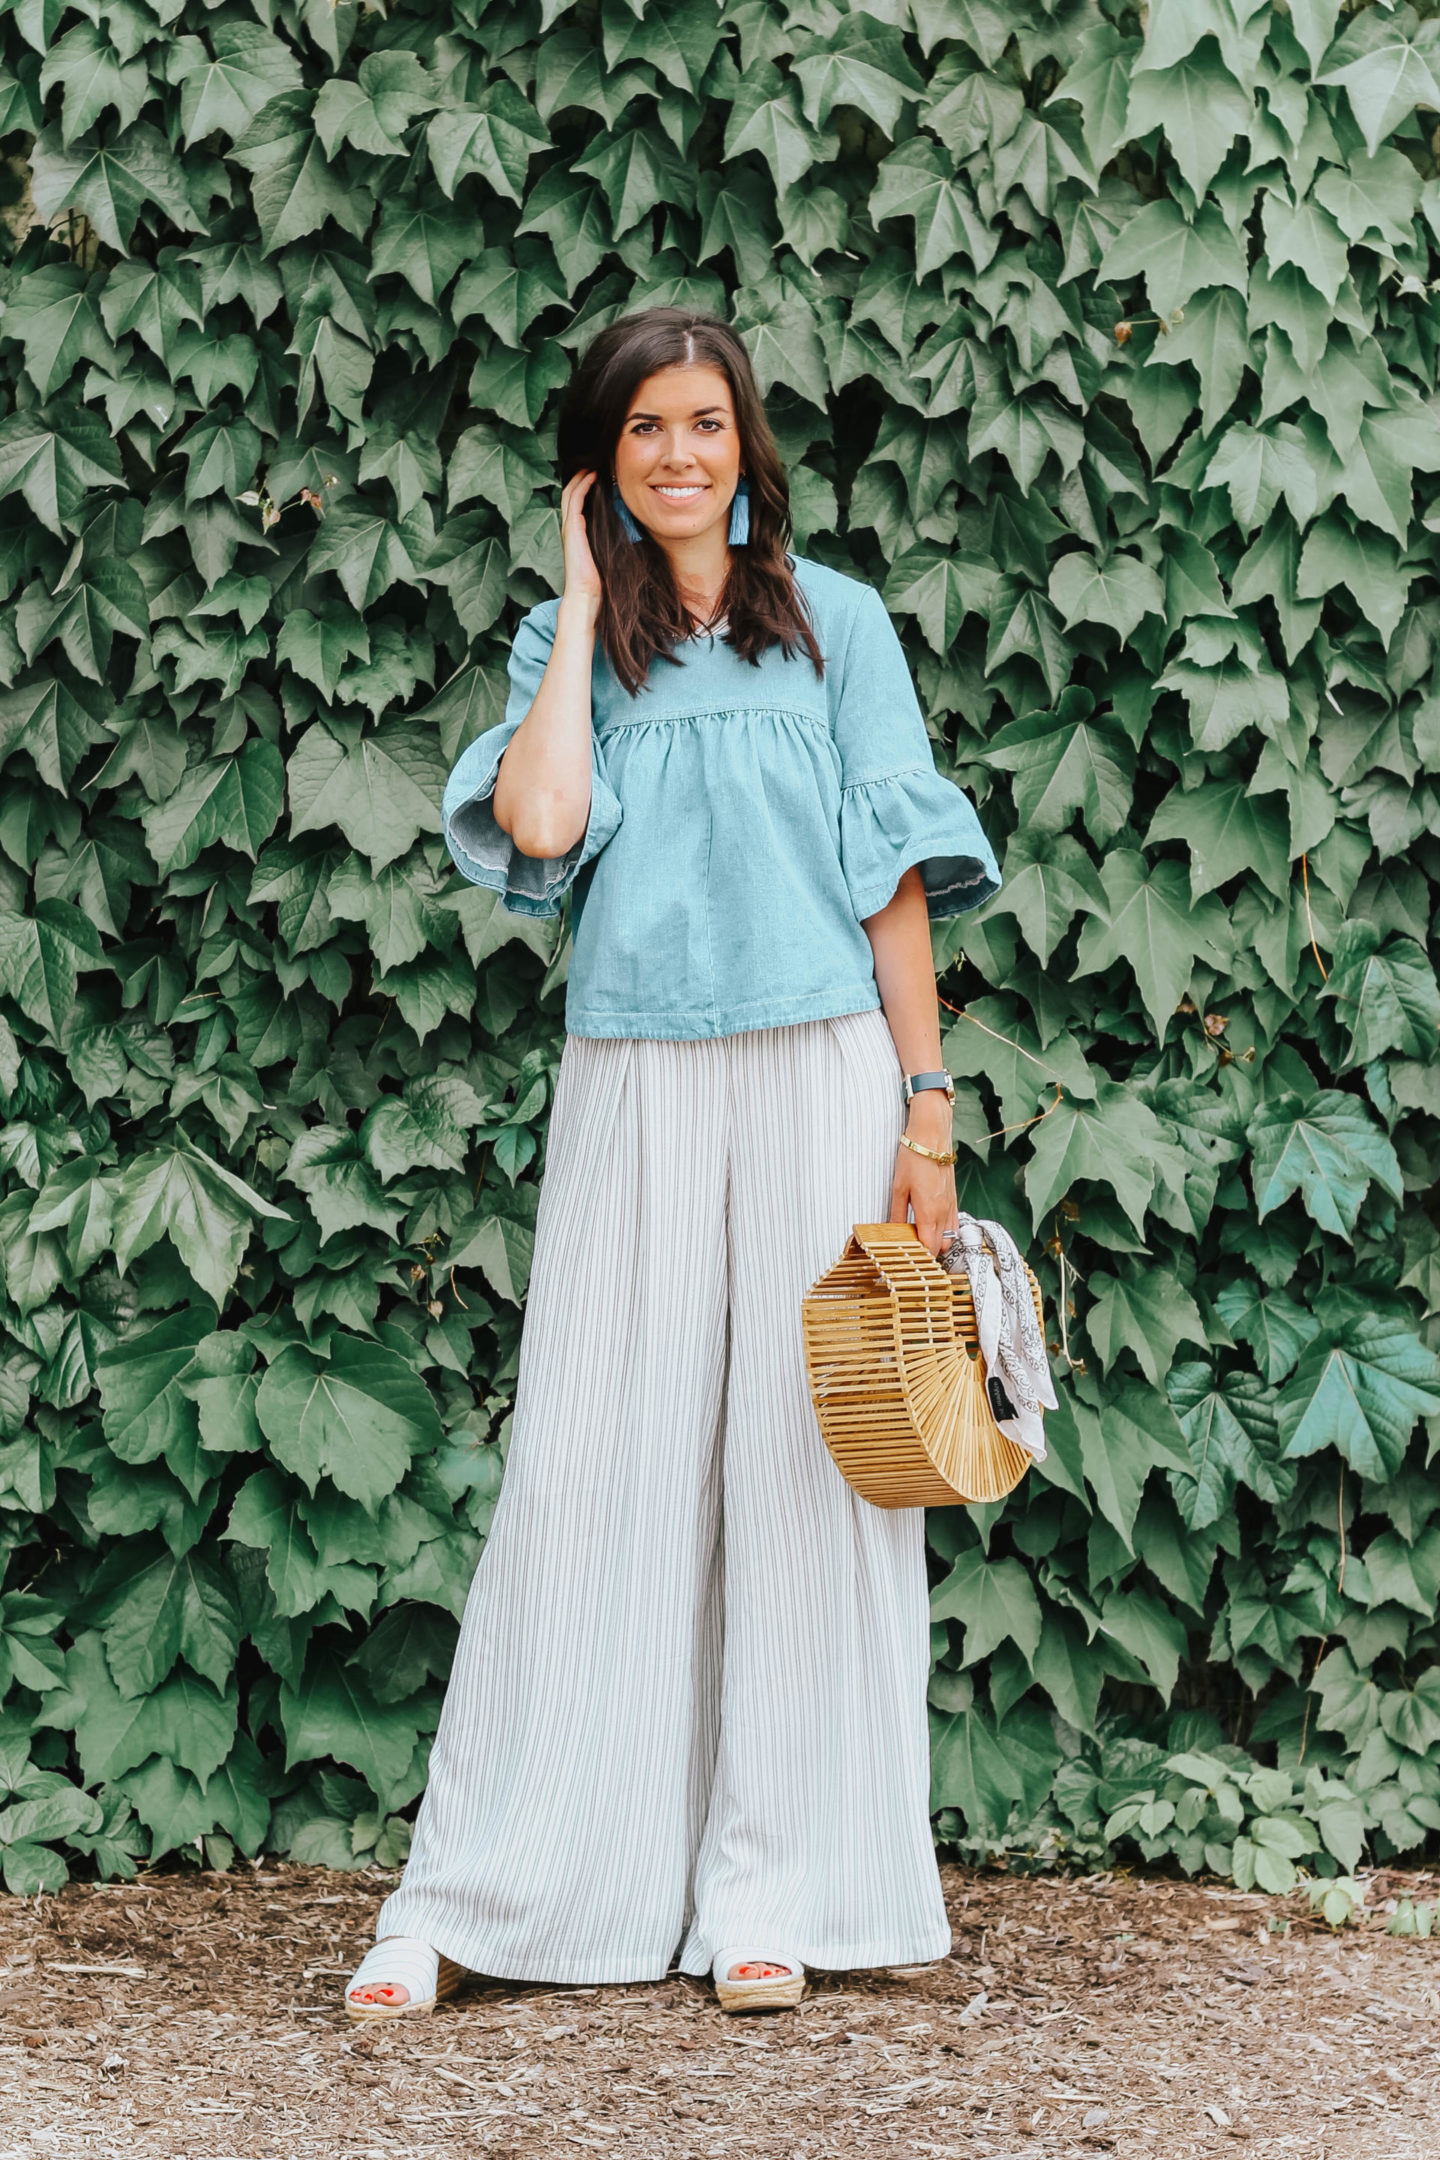 How To Style Wide Legged Pants For Summer